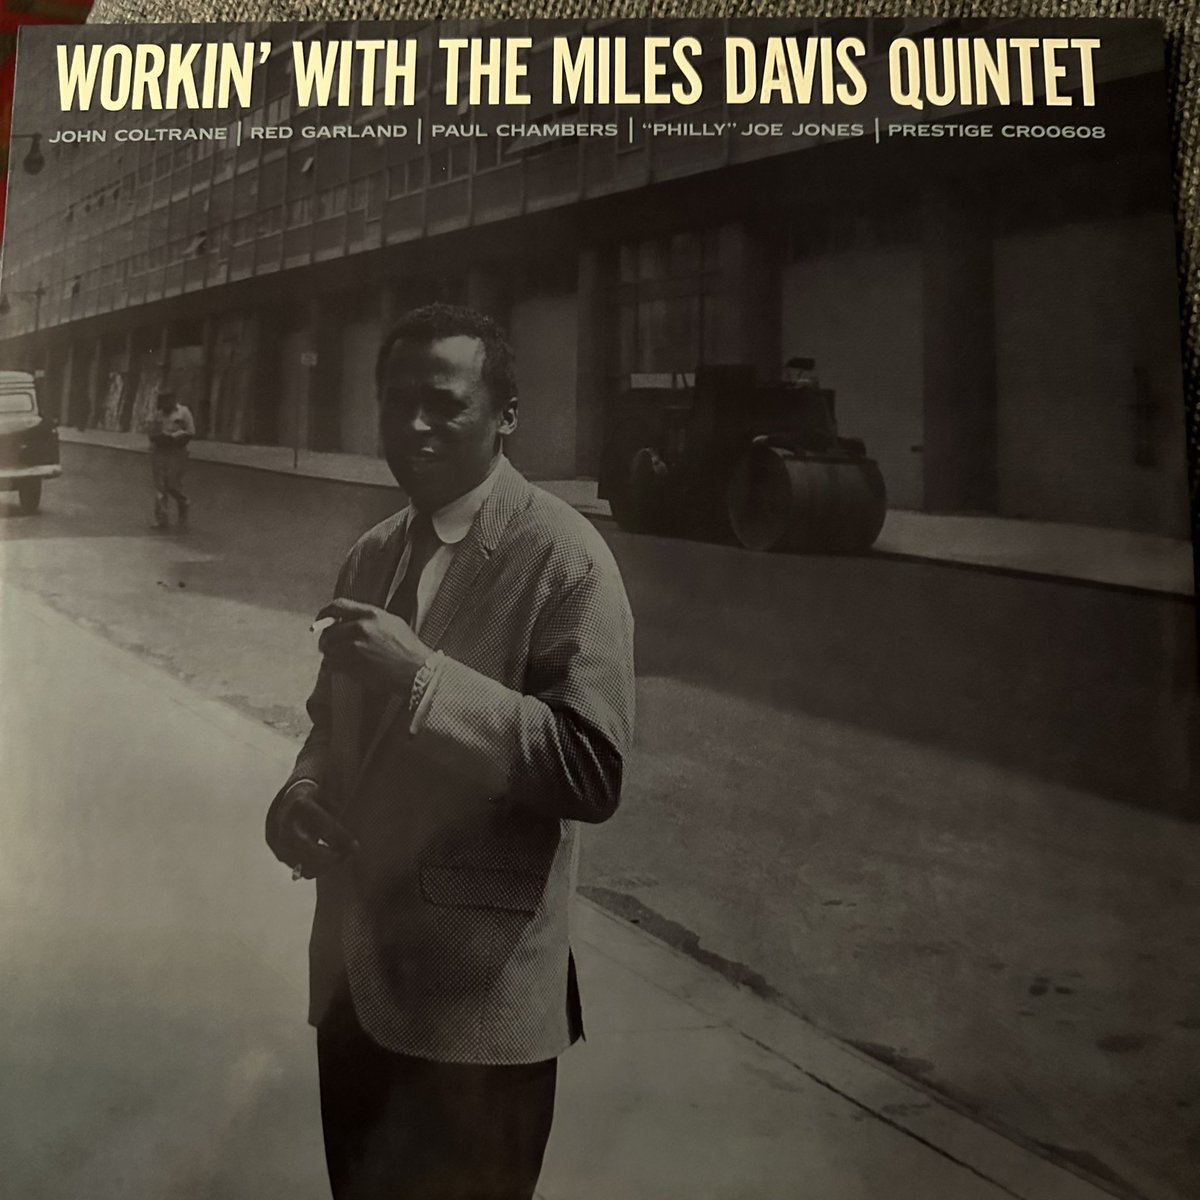 Now spinning - Workin’ With The Miles Davis Quintet. Recorded in 1956 and released circa January 1960.

In 1955 Davis formed a new quintet, featuring John Coltrane (tenor sax), Red Garland (piano), Paul Chambers (bass), and “Philly” Joe Jones (drums).
1/2 https://t.co/IzAICM1E2k